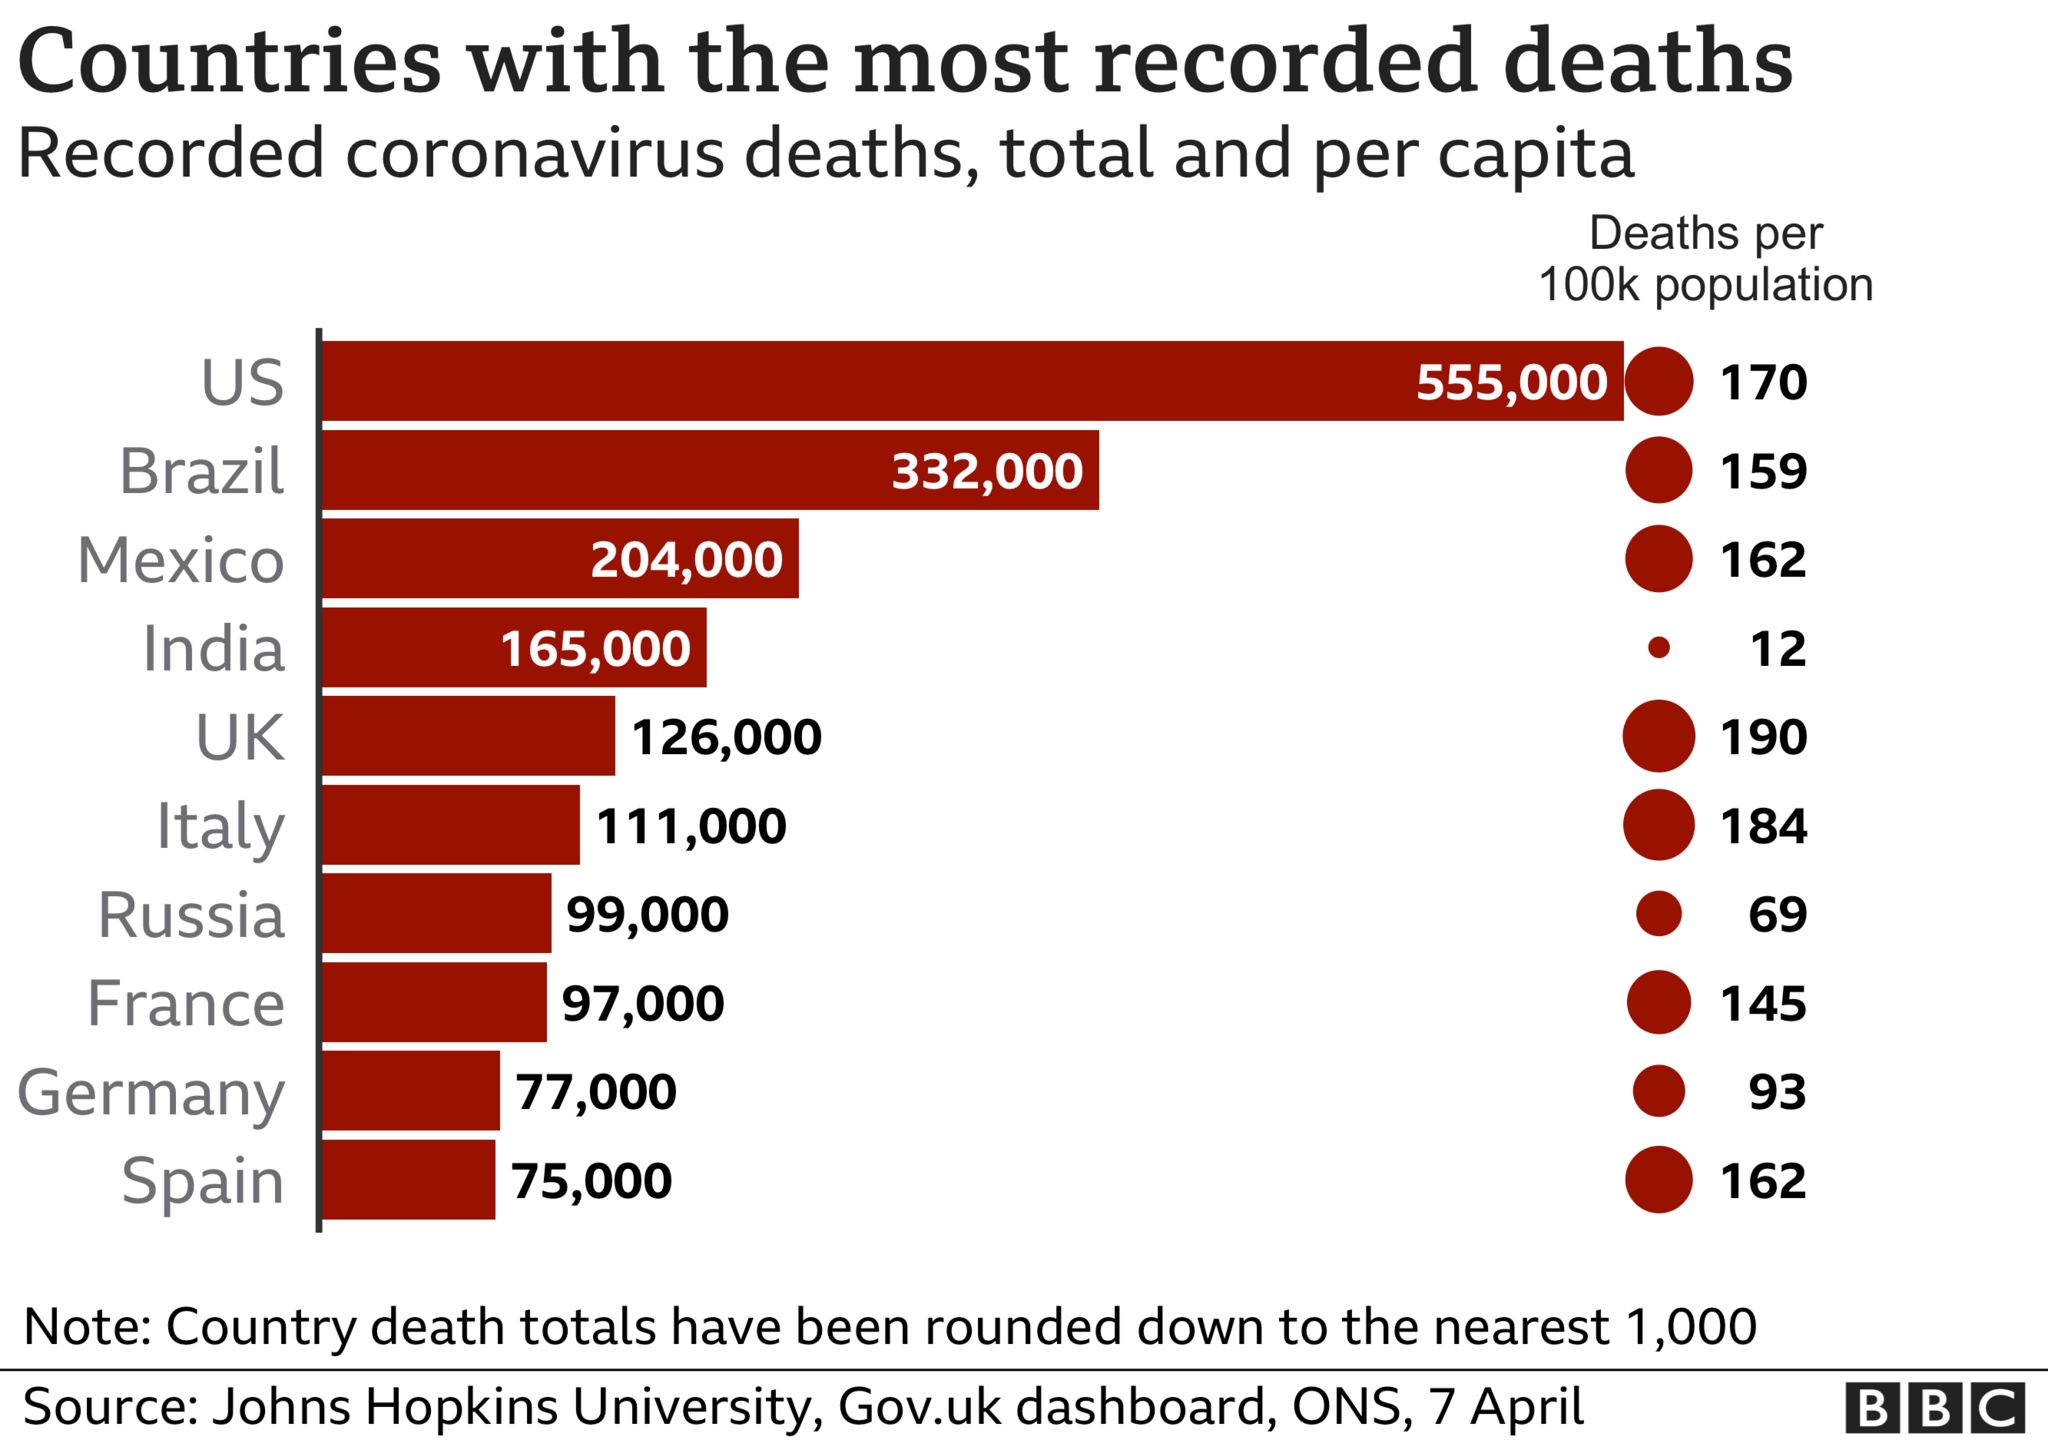 Image shows the countries with the most recorded deaths